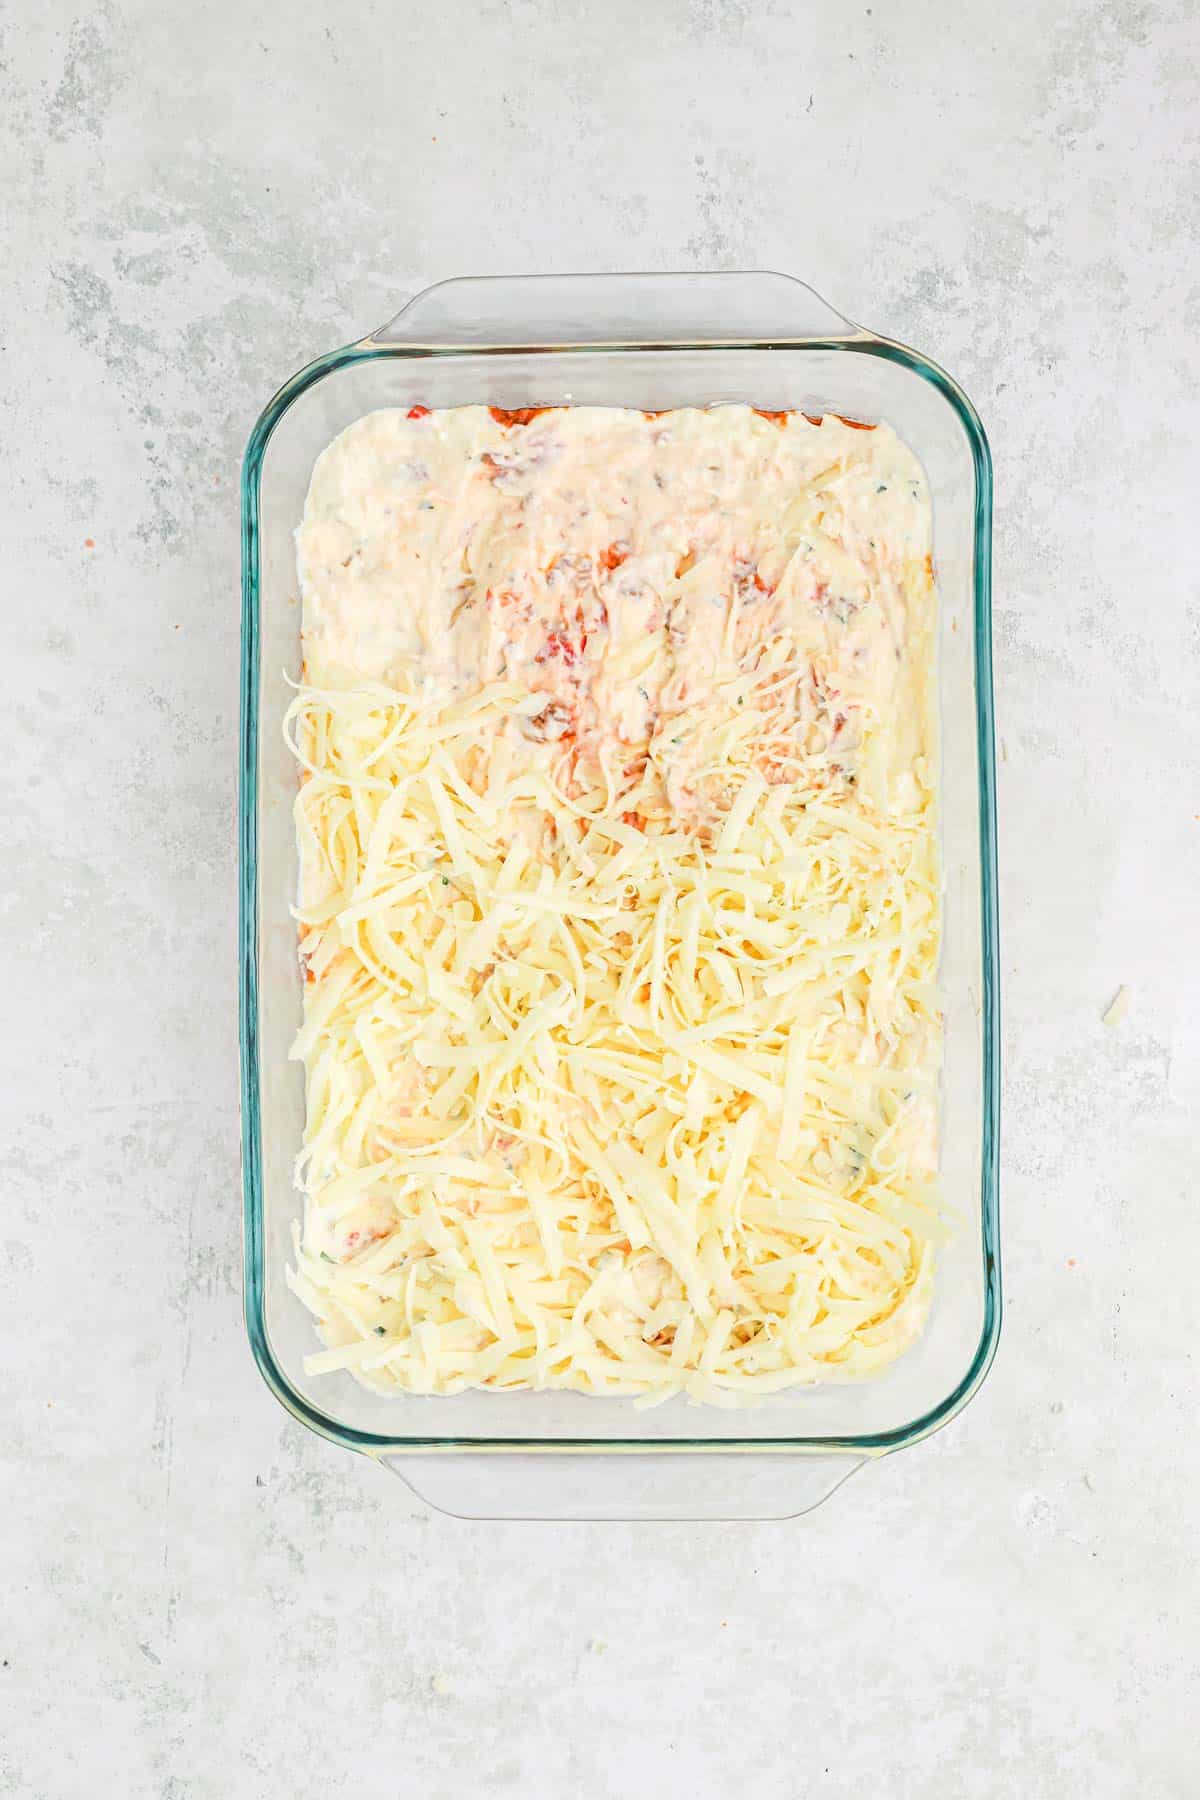 Cheese and creamy mixture on top of the noodles.